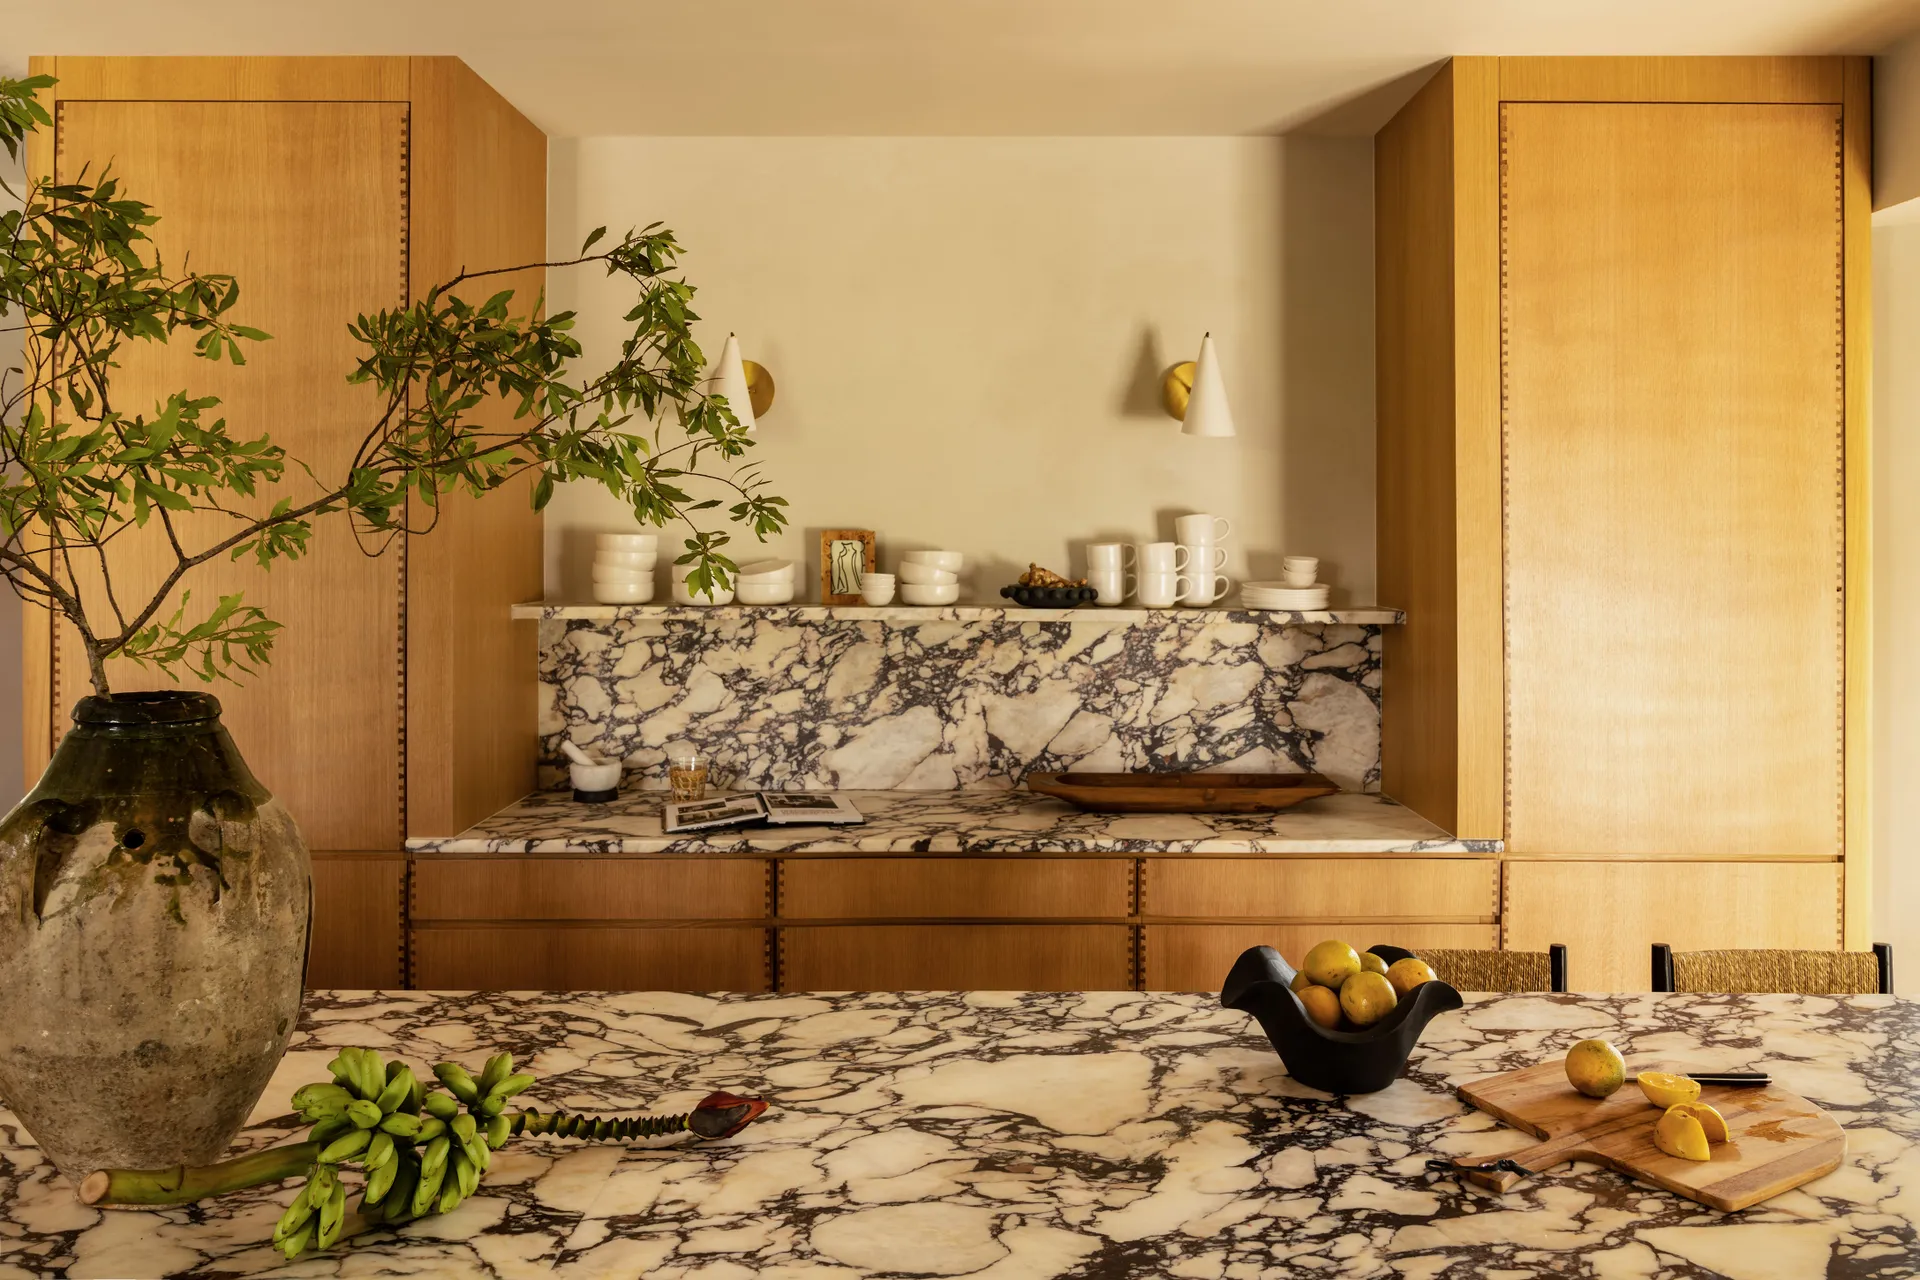 The marble countertops of the kitchen island and the kitchen counter